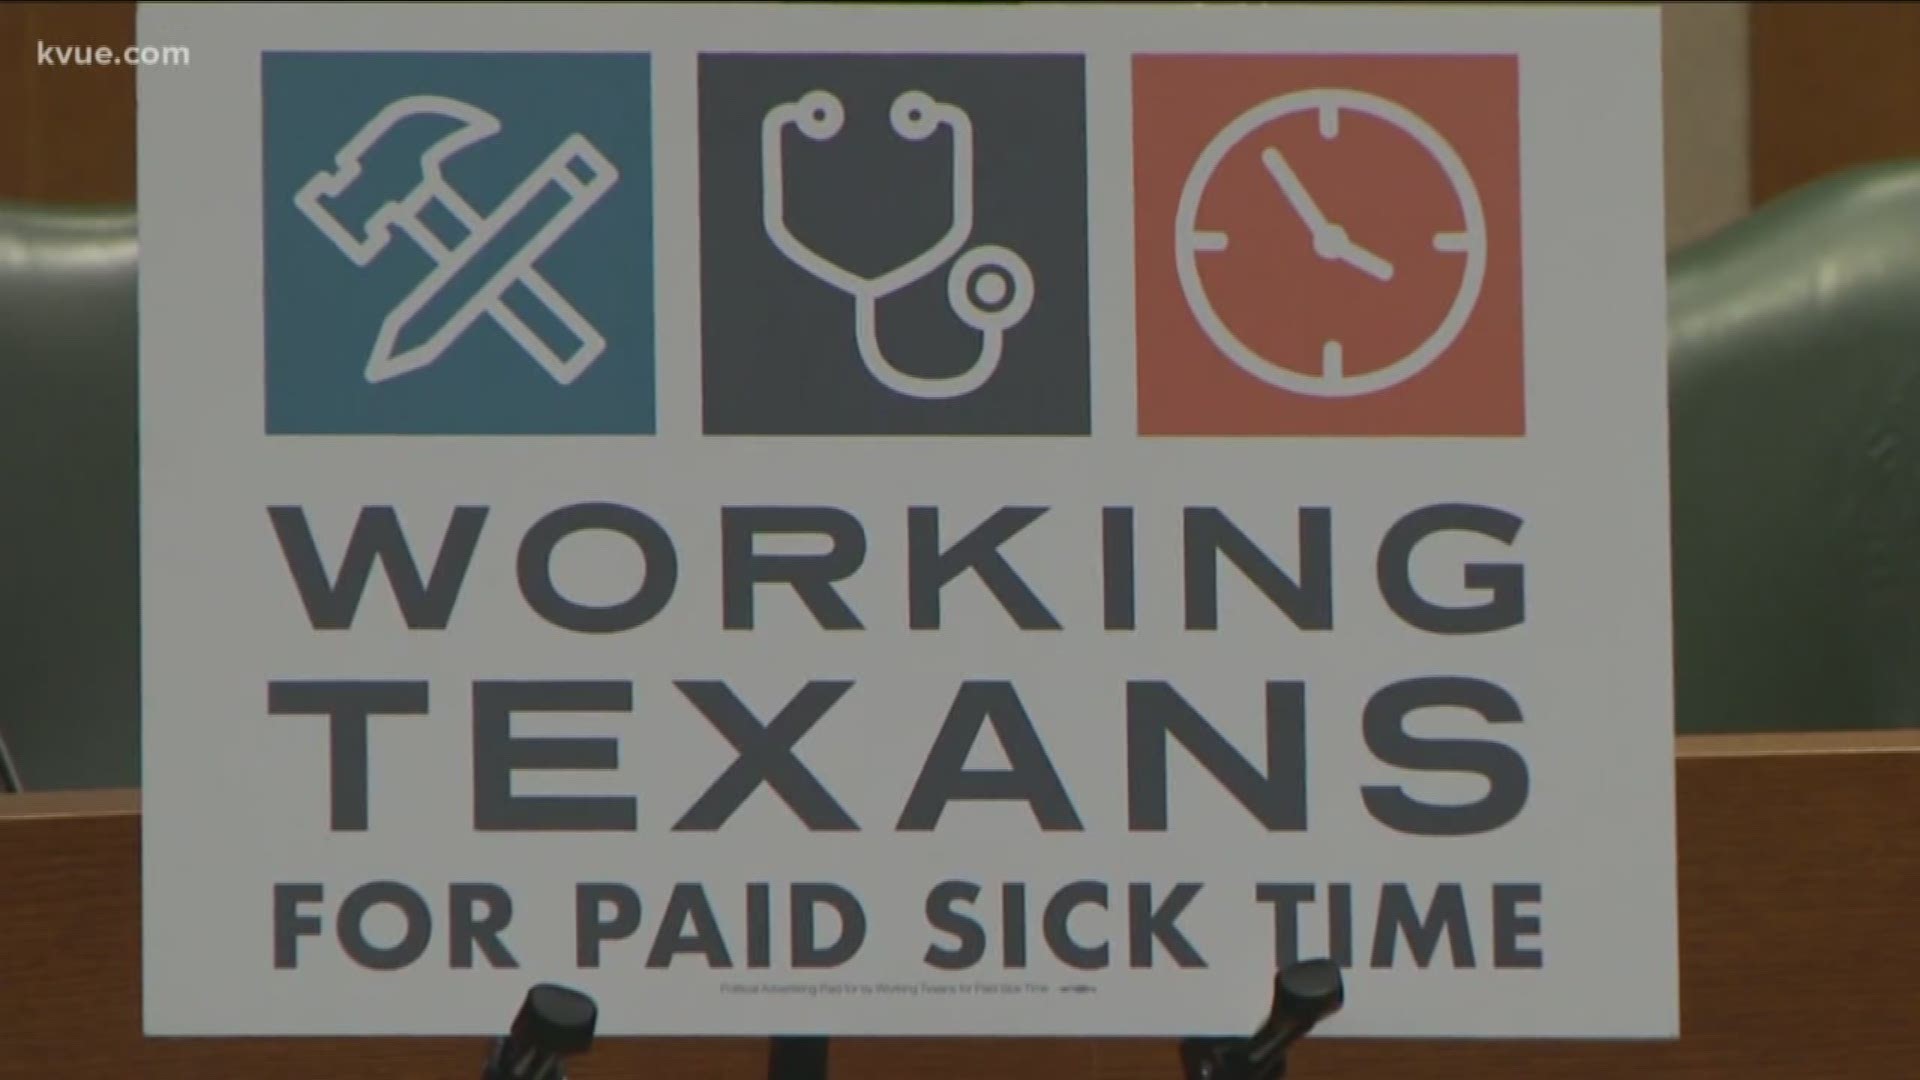 Last year, Austin became the first city in Texas to pass a paid sick leave ordinance. But before it could go into effect, a judge ruled it unconstitutional. And the city's efforts to appeal the decision failed. Now, a string of bills filed in the legislature could make the policy illegal.